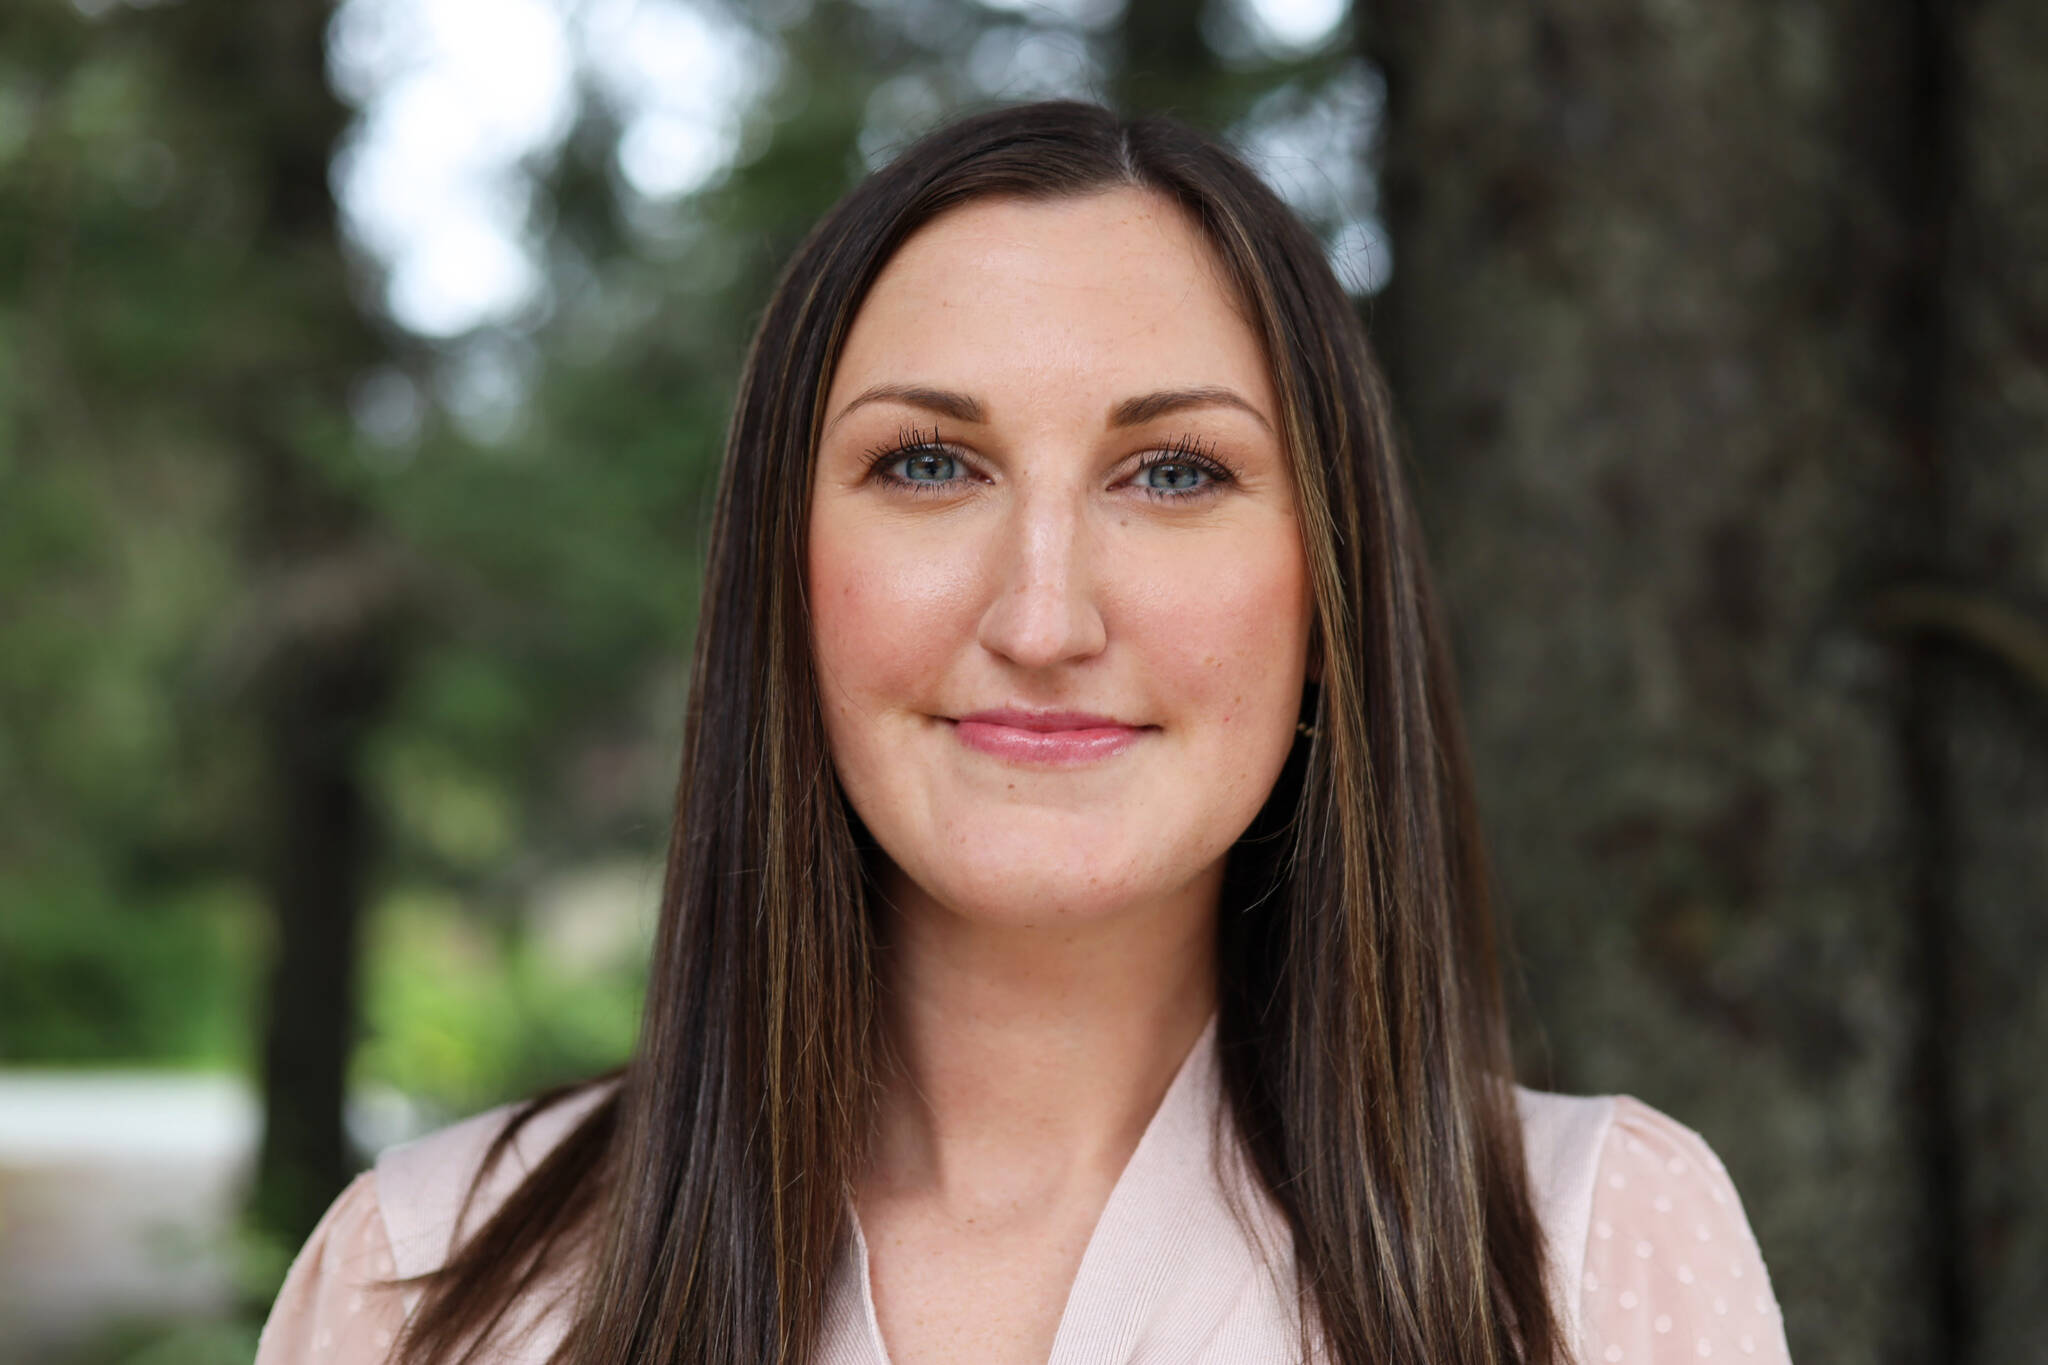 Paige Sipniewski, pictured, is running as a Juneau Board of Education candidate in the 2023 City and Borough of Juneau municipal election. (Clarise Larson / Juneau Empire)